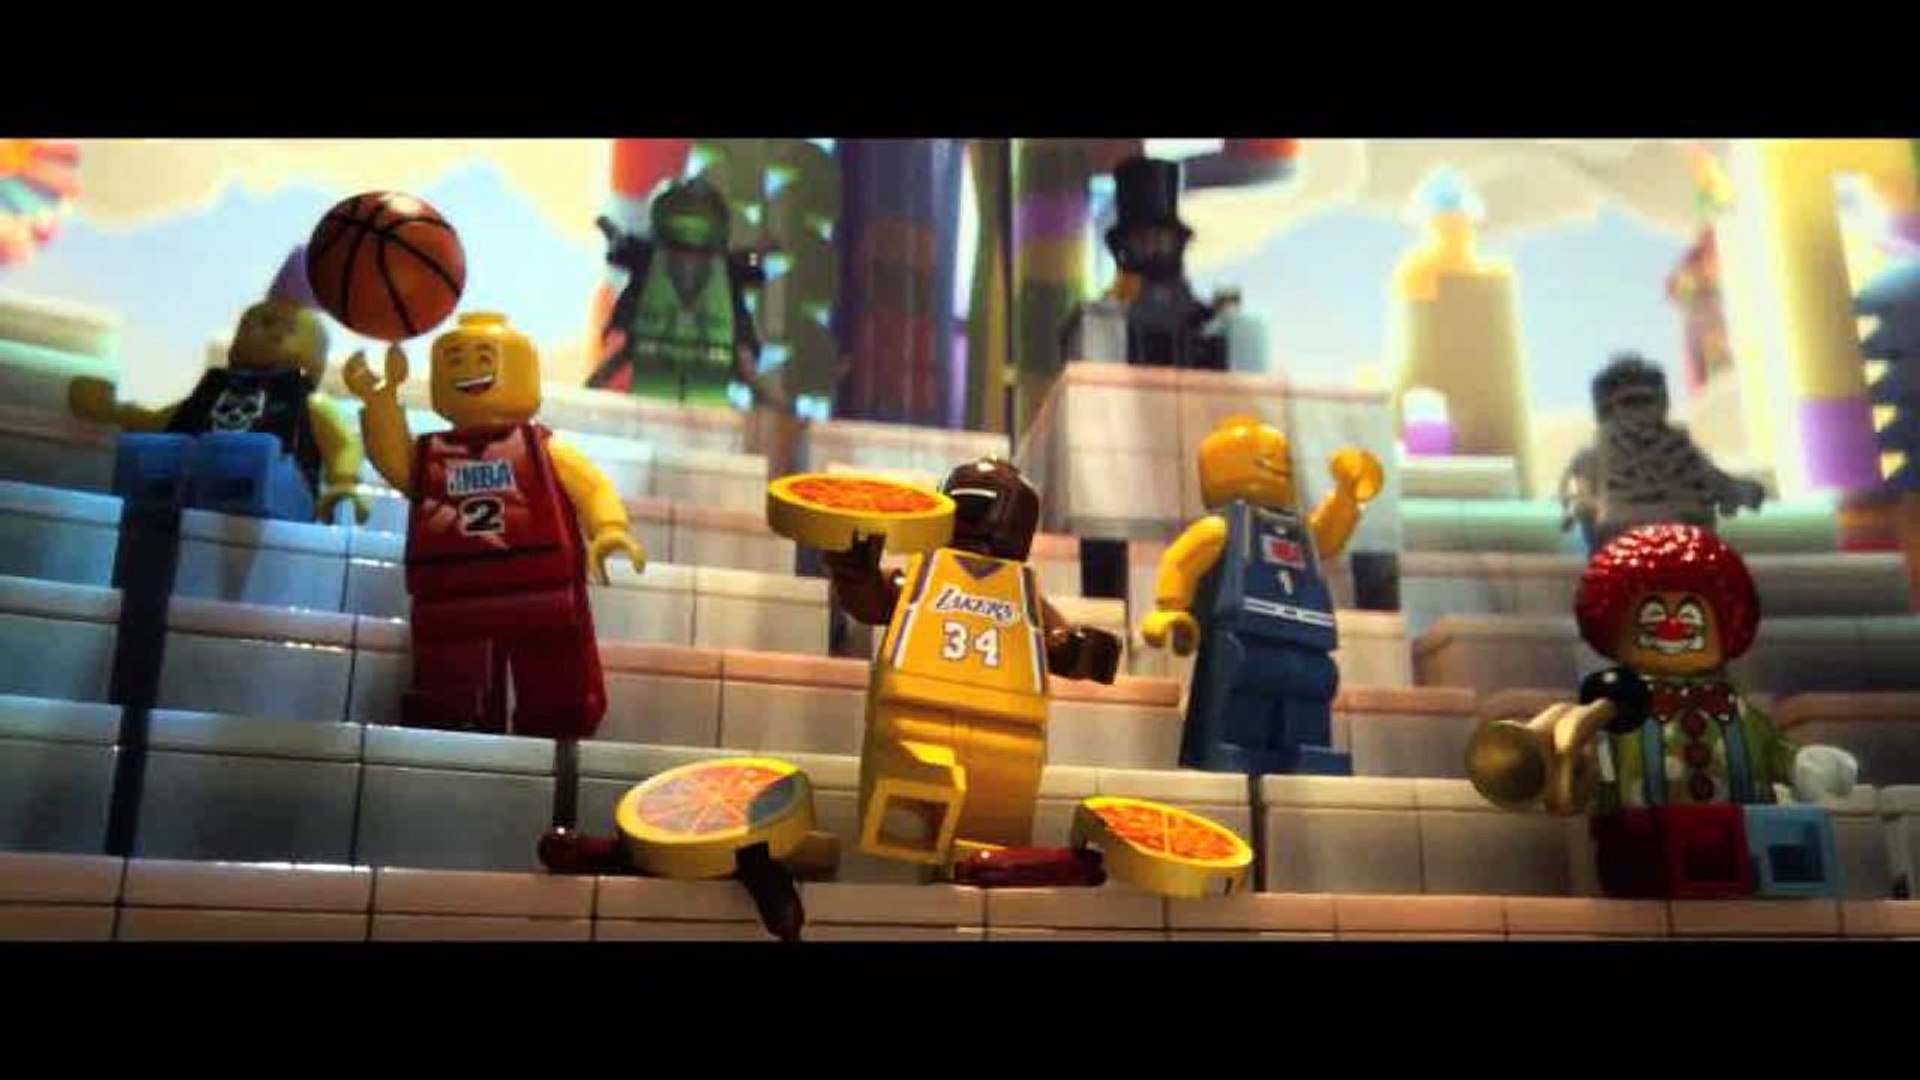 The Lego Movie 2014 Full Movie Online In Hd Quality